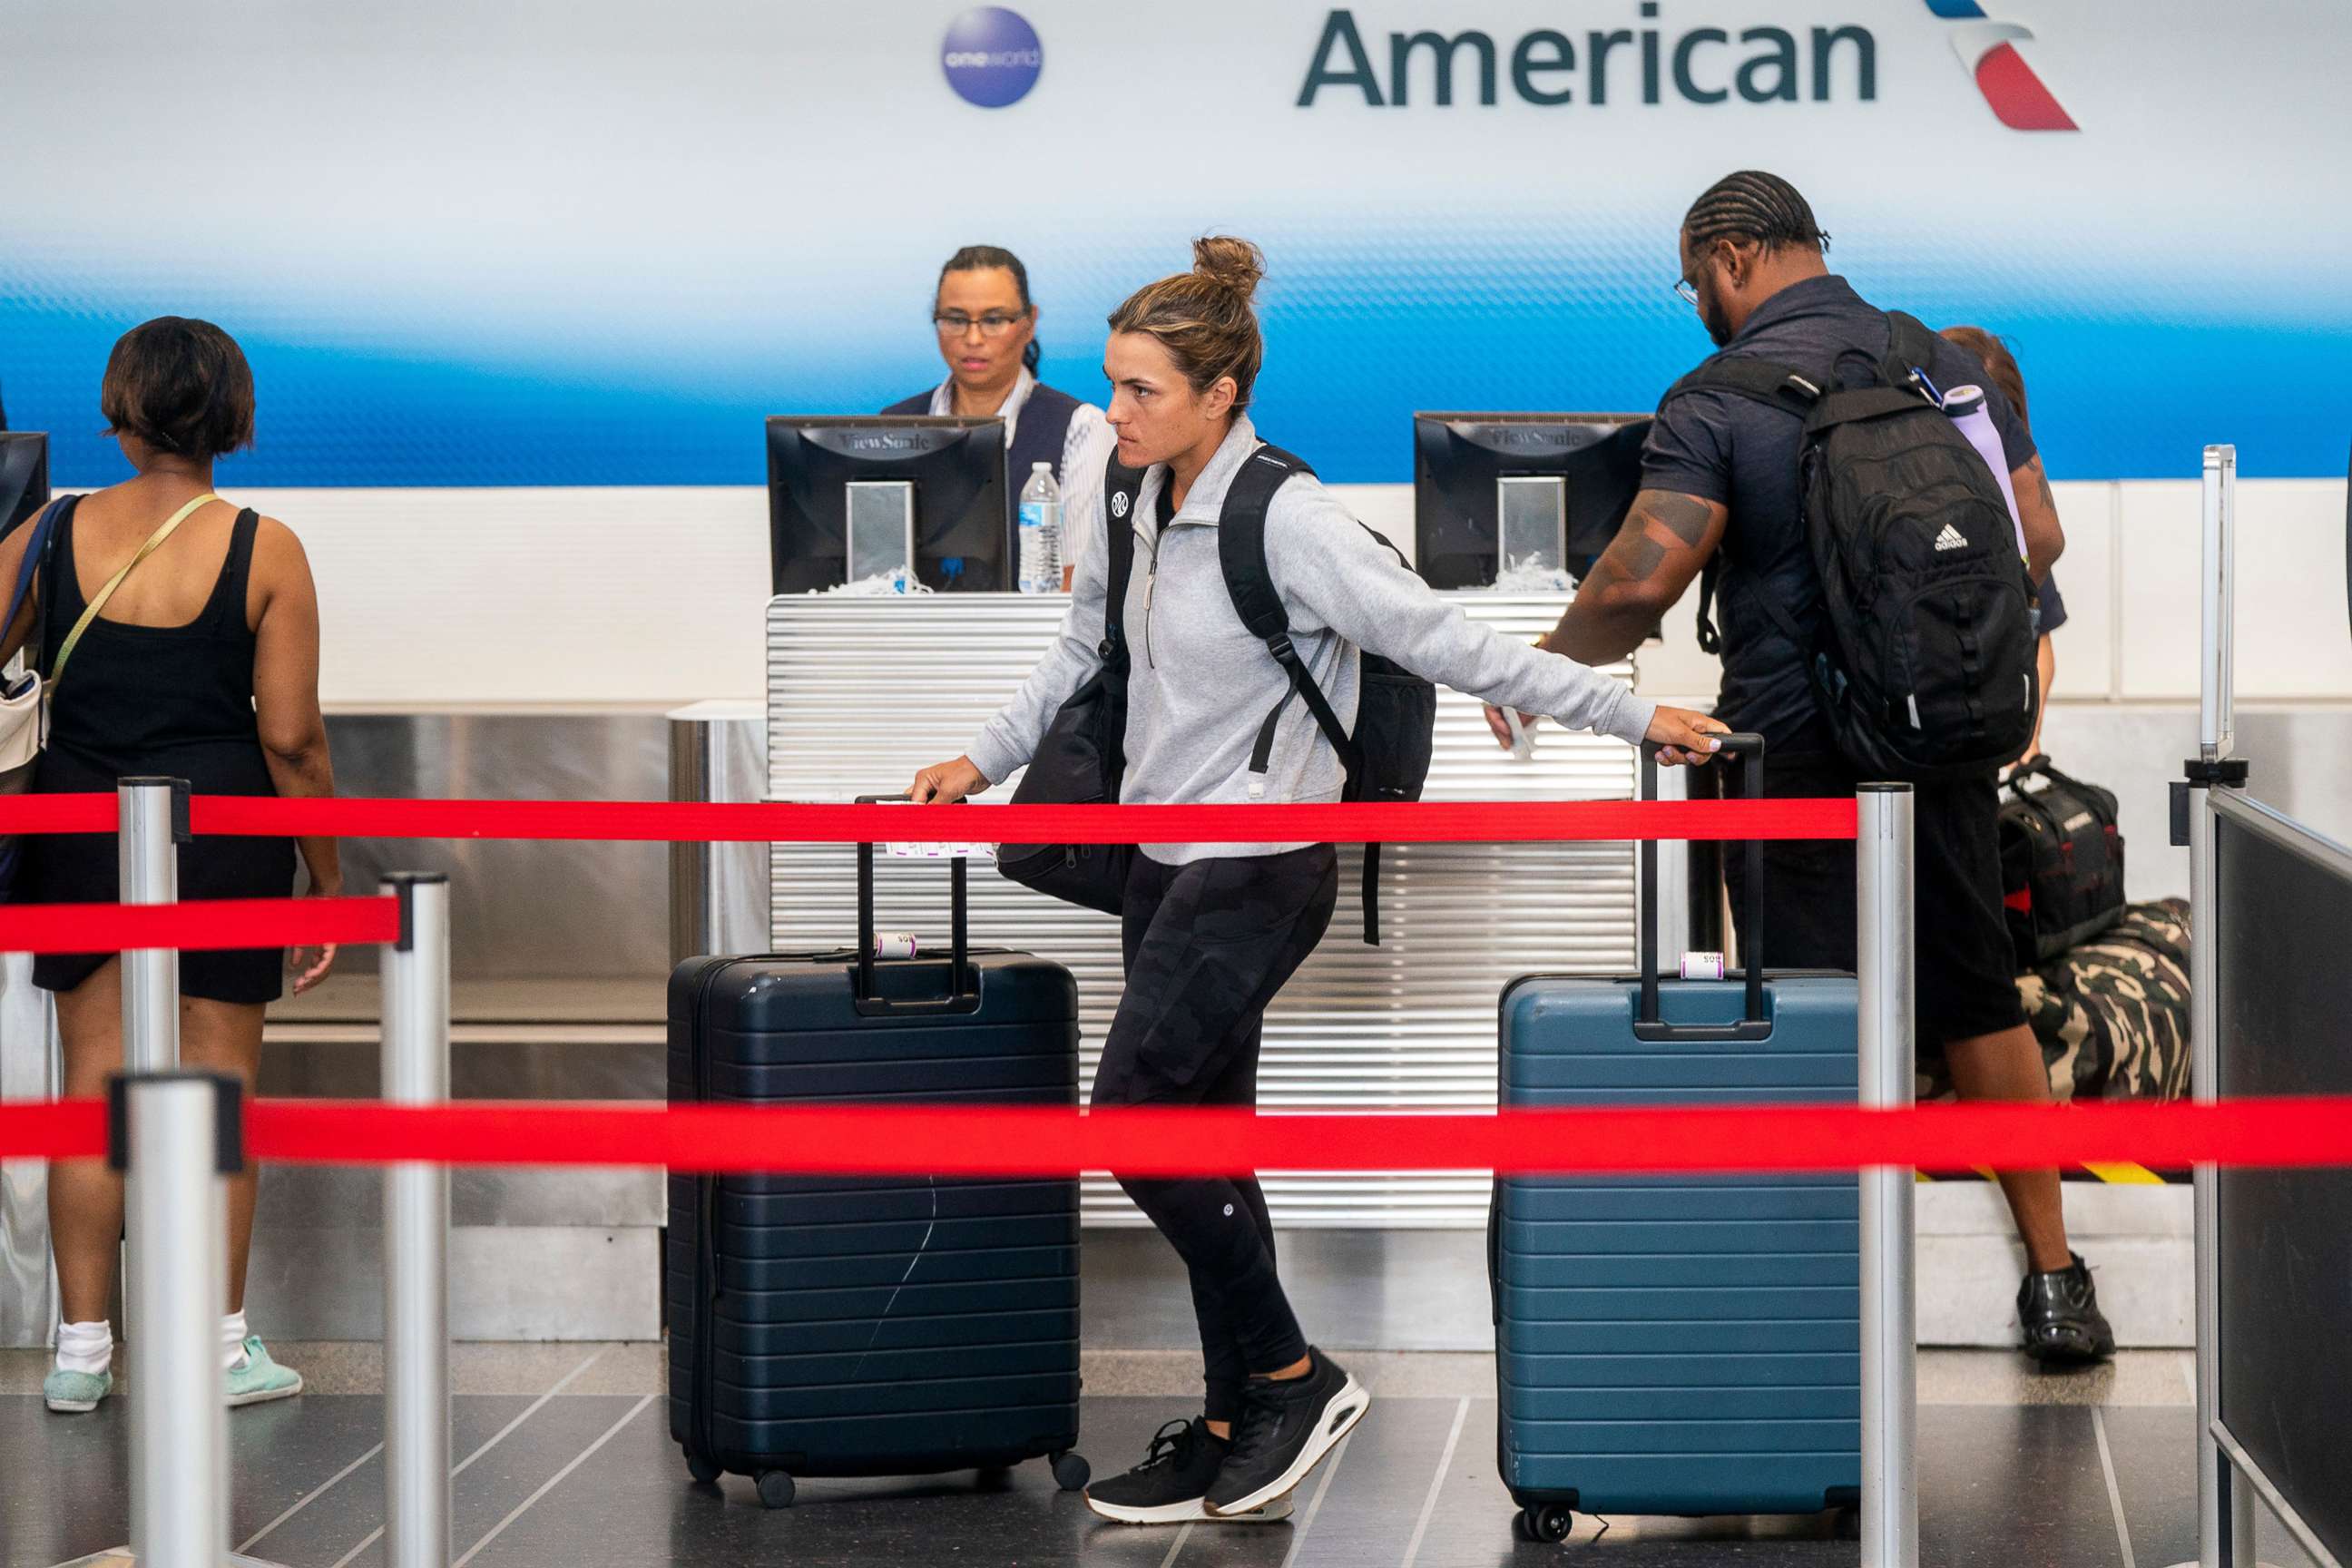 PHOTO: In this July 1, 2022, file photo, passengers check in at the American Airlines ticketing counter at Ronald Reagan Washington National Airport in Arlington, Va.